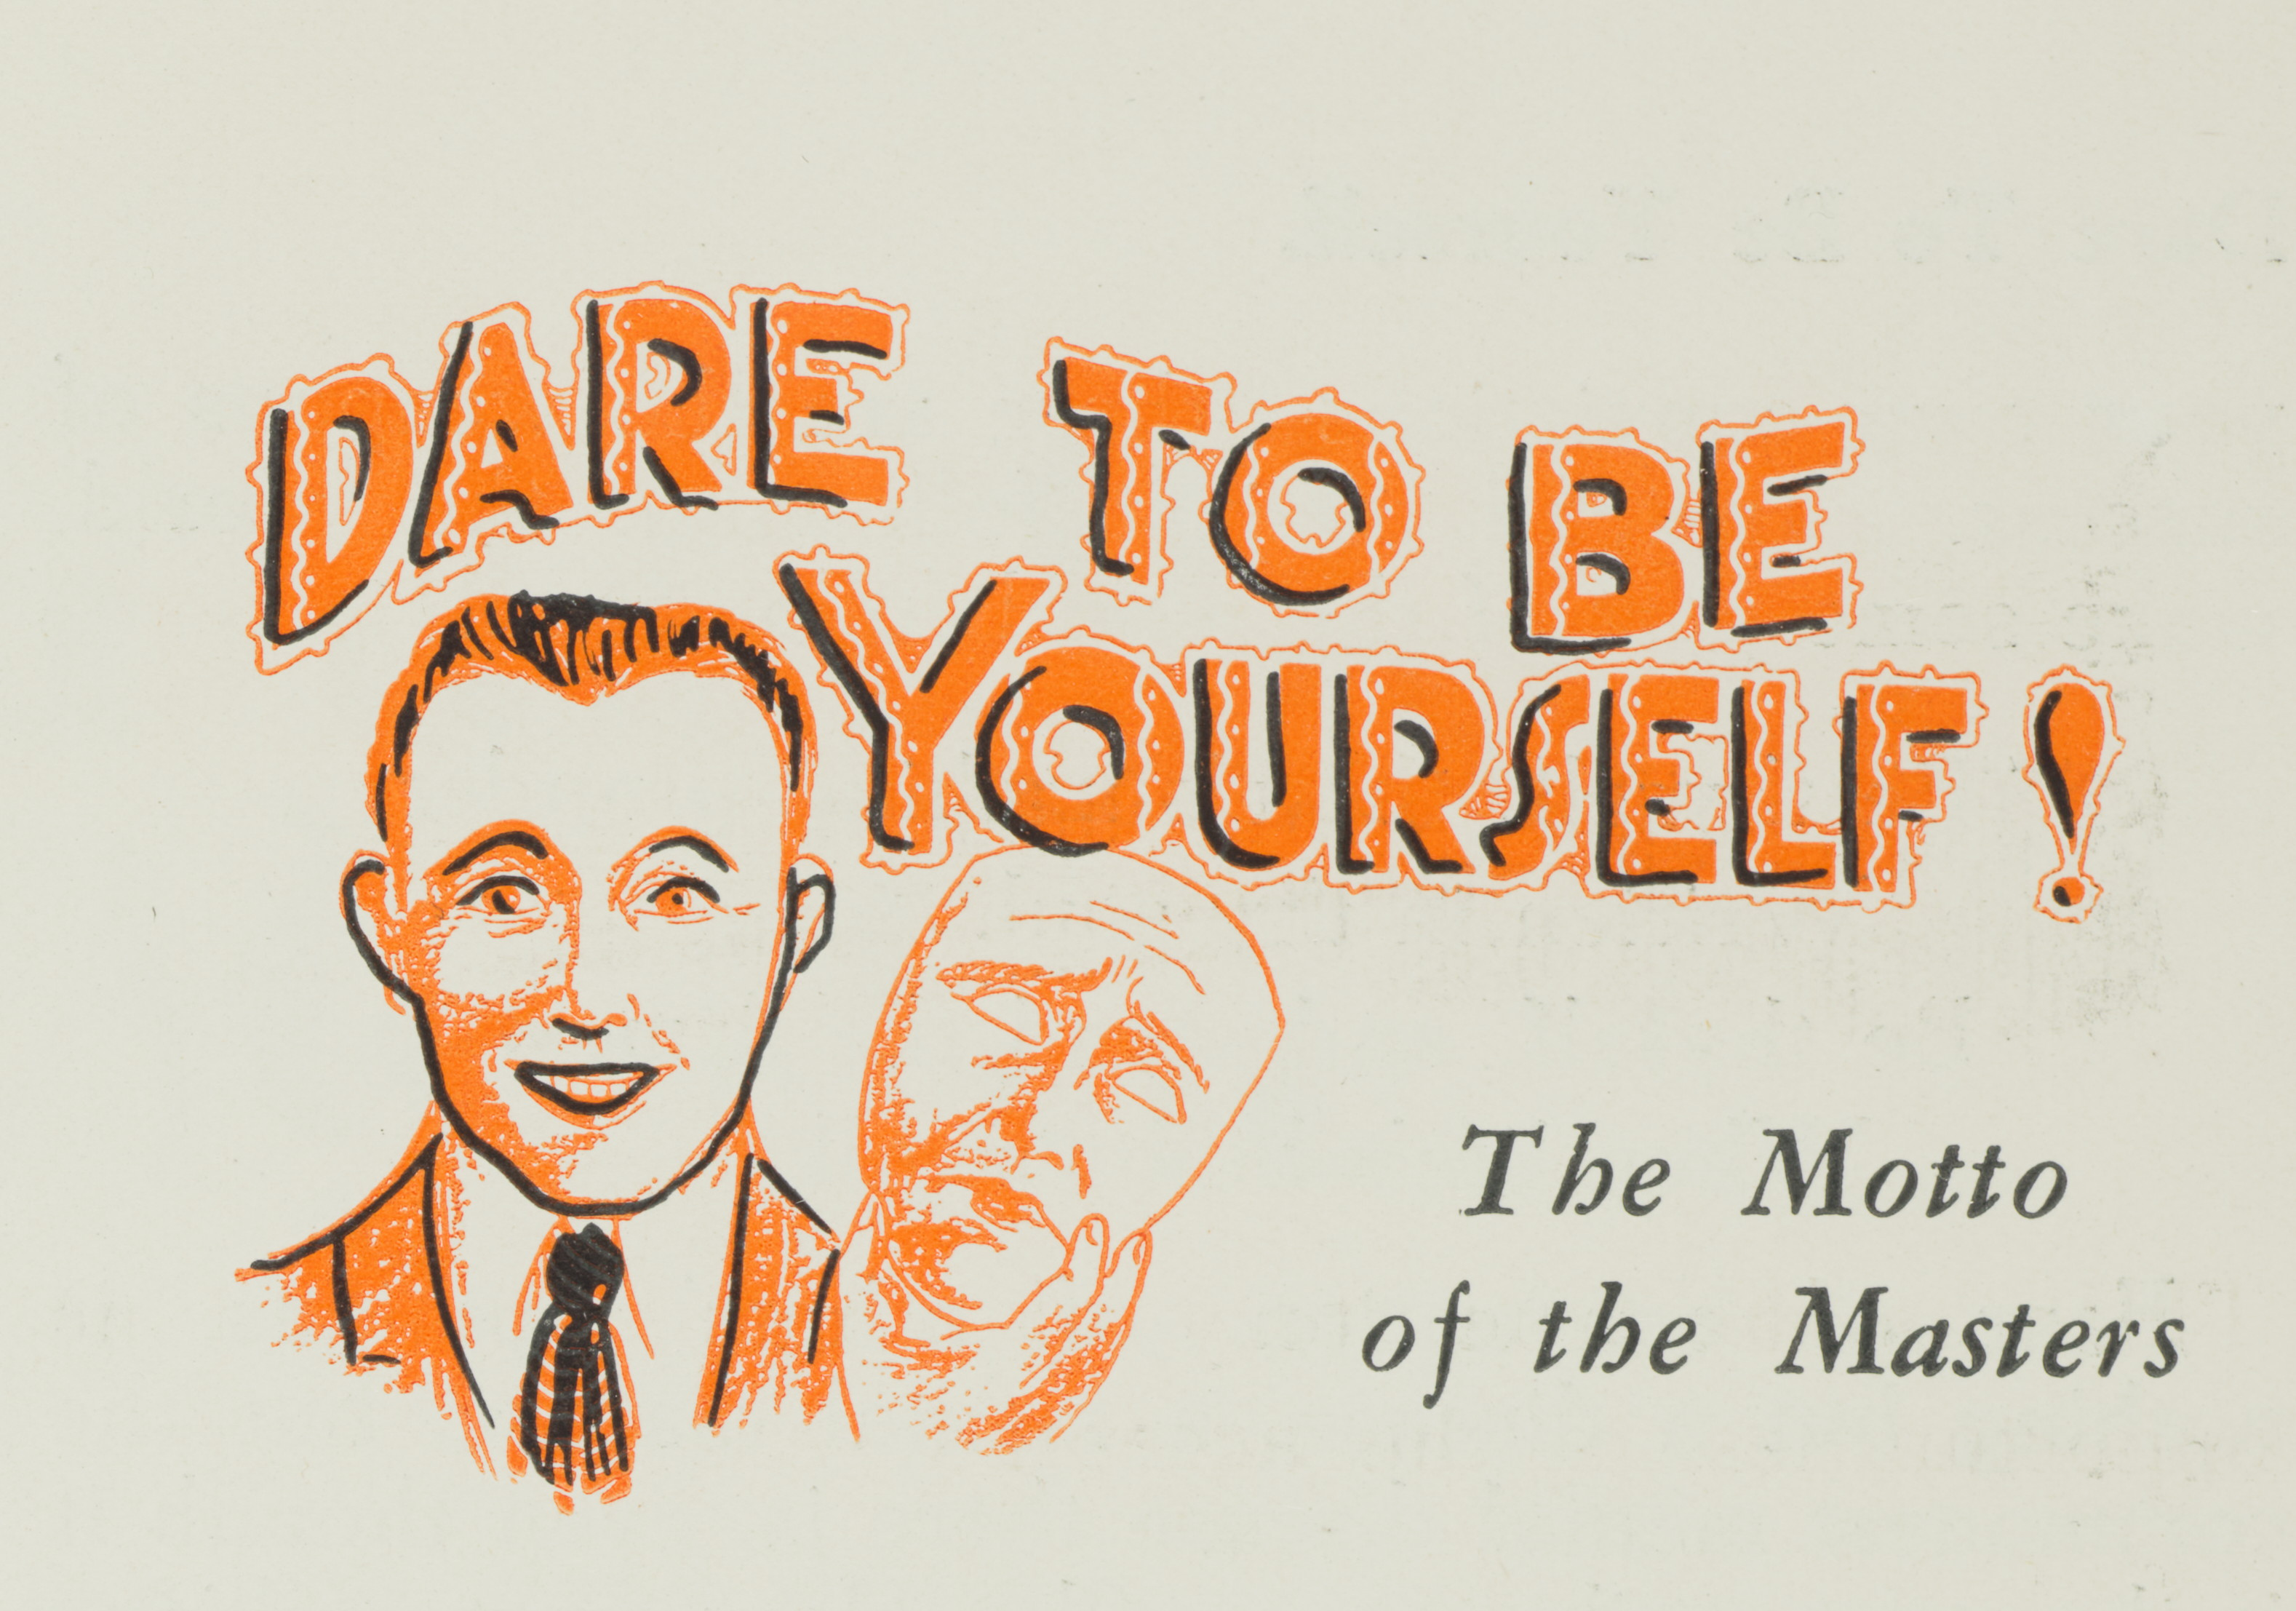 Drawing of a man holding a face mask. Text read 'Dare to be yourself. The Motto of the Masters'.